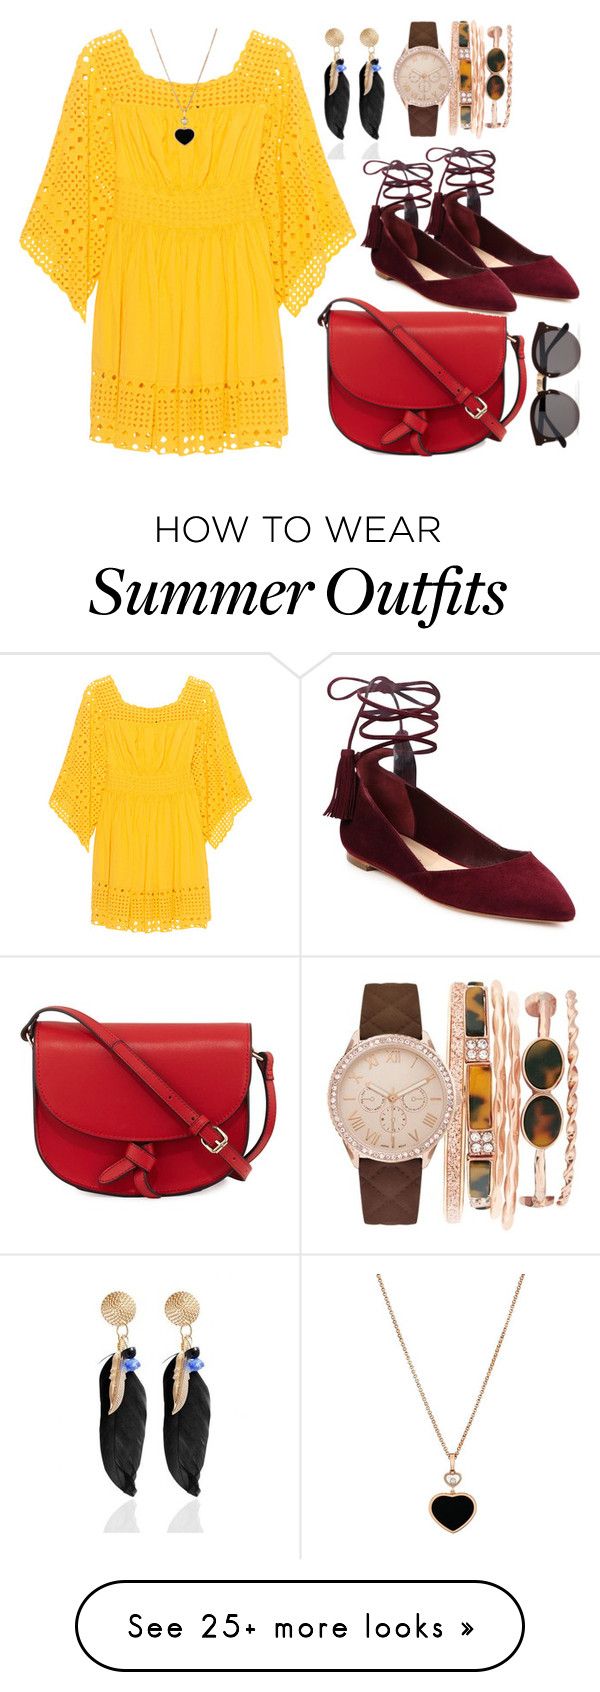 "kuning-kuning aseque" by rahmafiraaa on Polyvore featuring KC Jagger,...